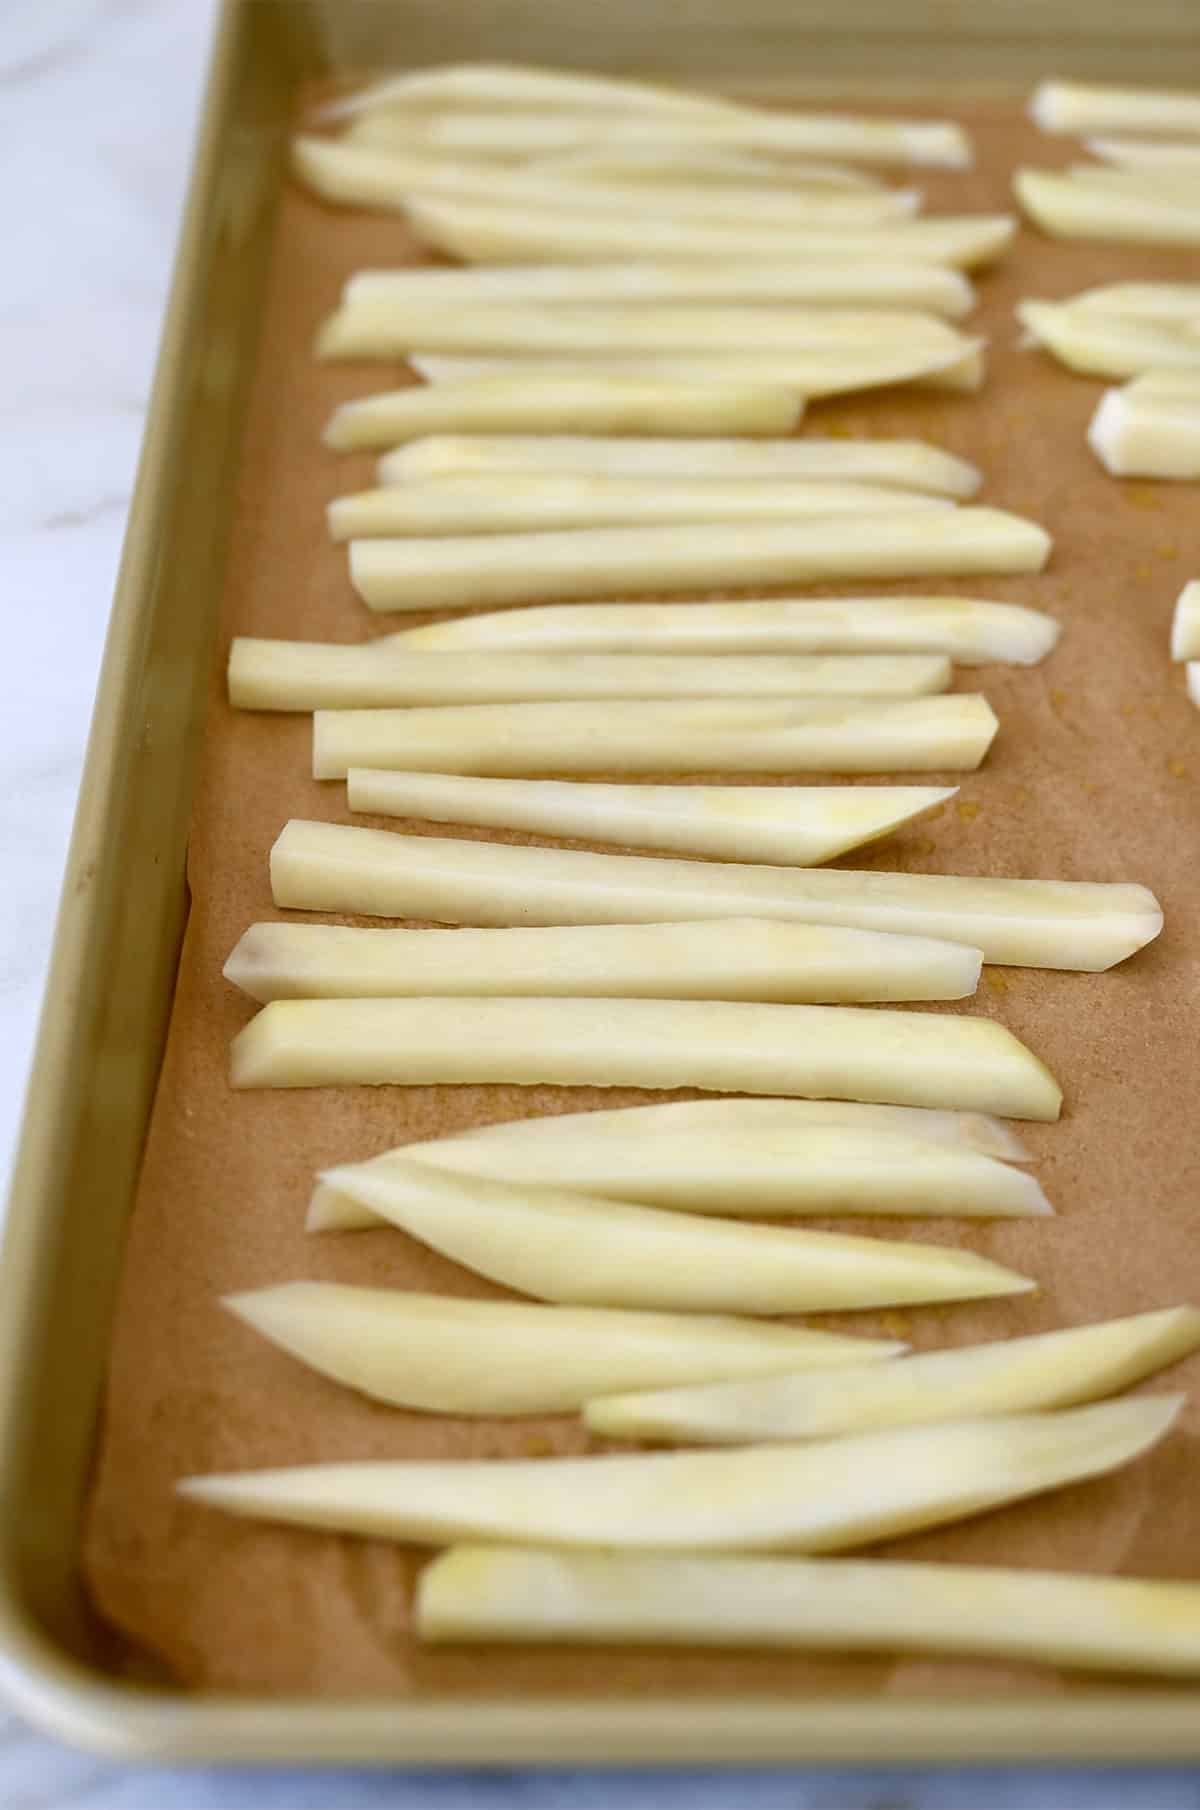 Unbooked fries on a parchment paper-lined baking sheet.